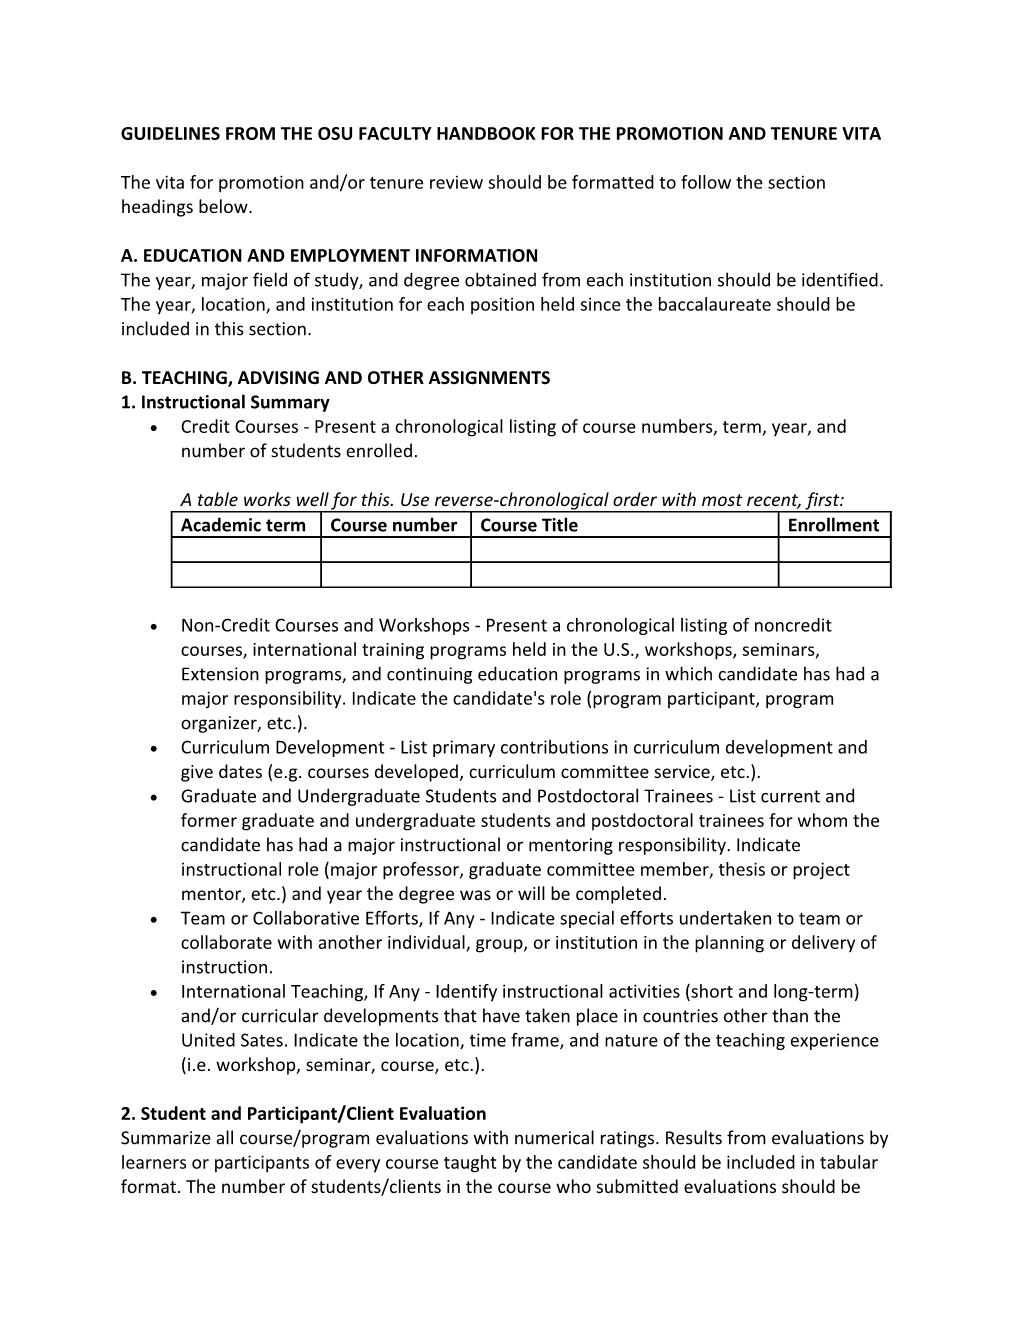 Guidelines from the Osu Faculty Handbook for the Promotion and Tenure Vita